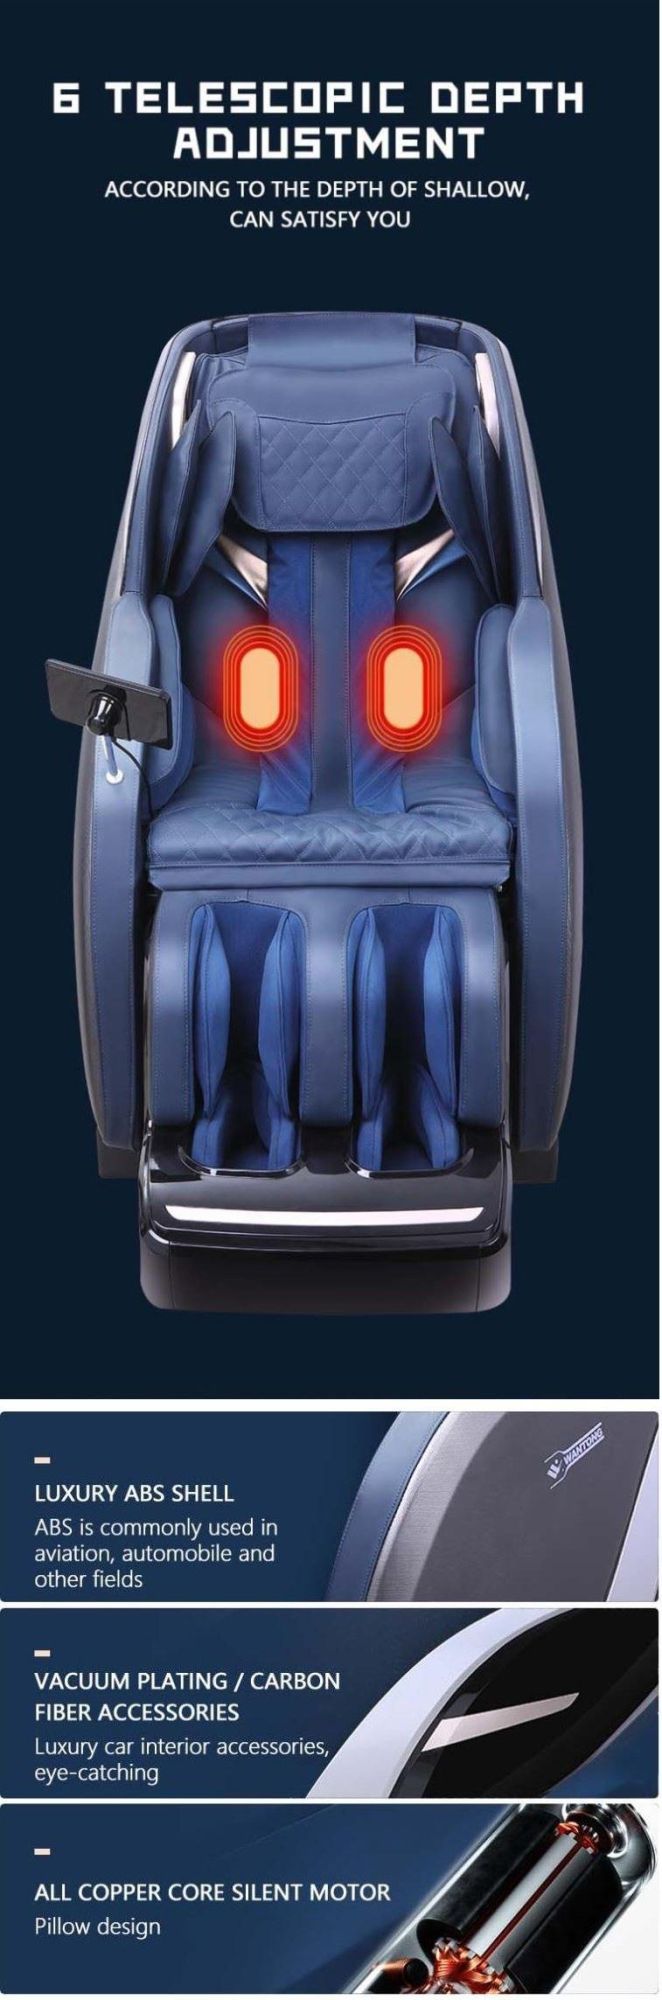 New Design Best Home Relax Massage Chair with Sole Roller OEM Manufacturer